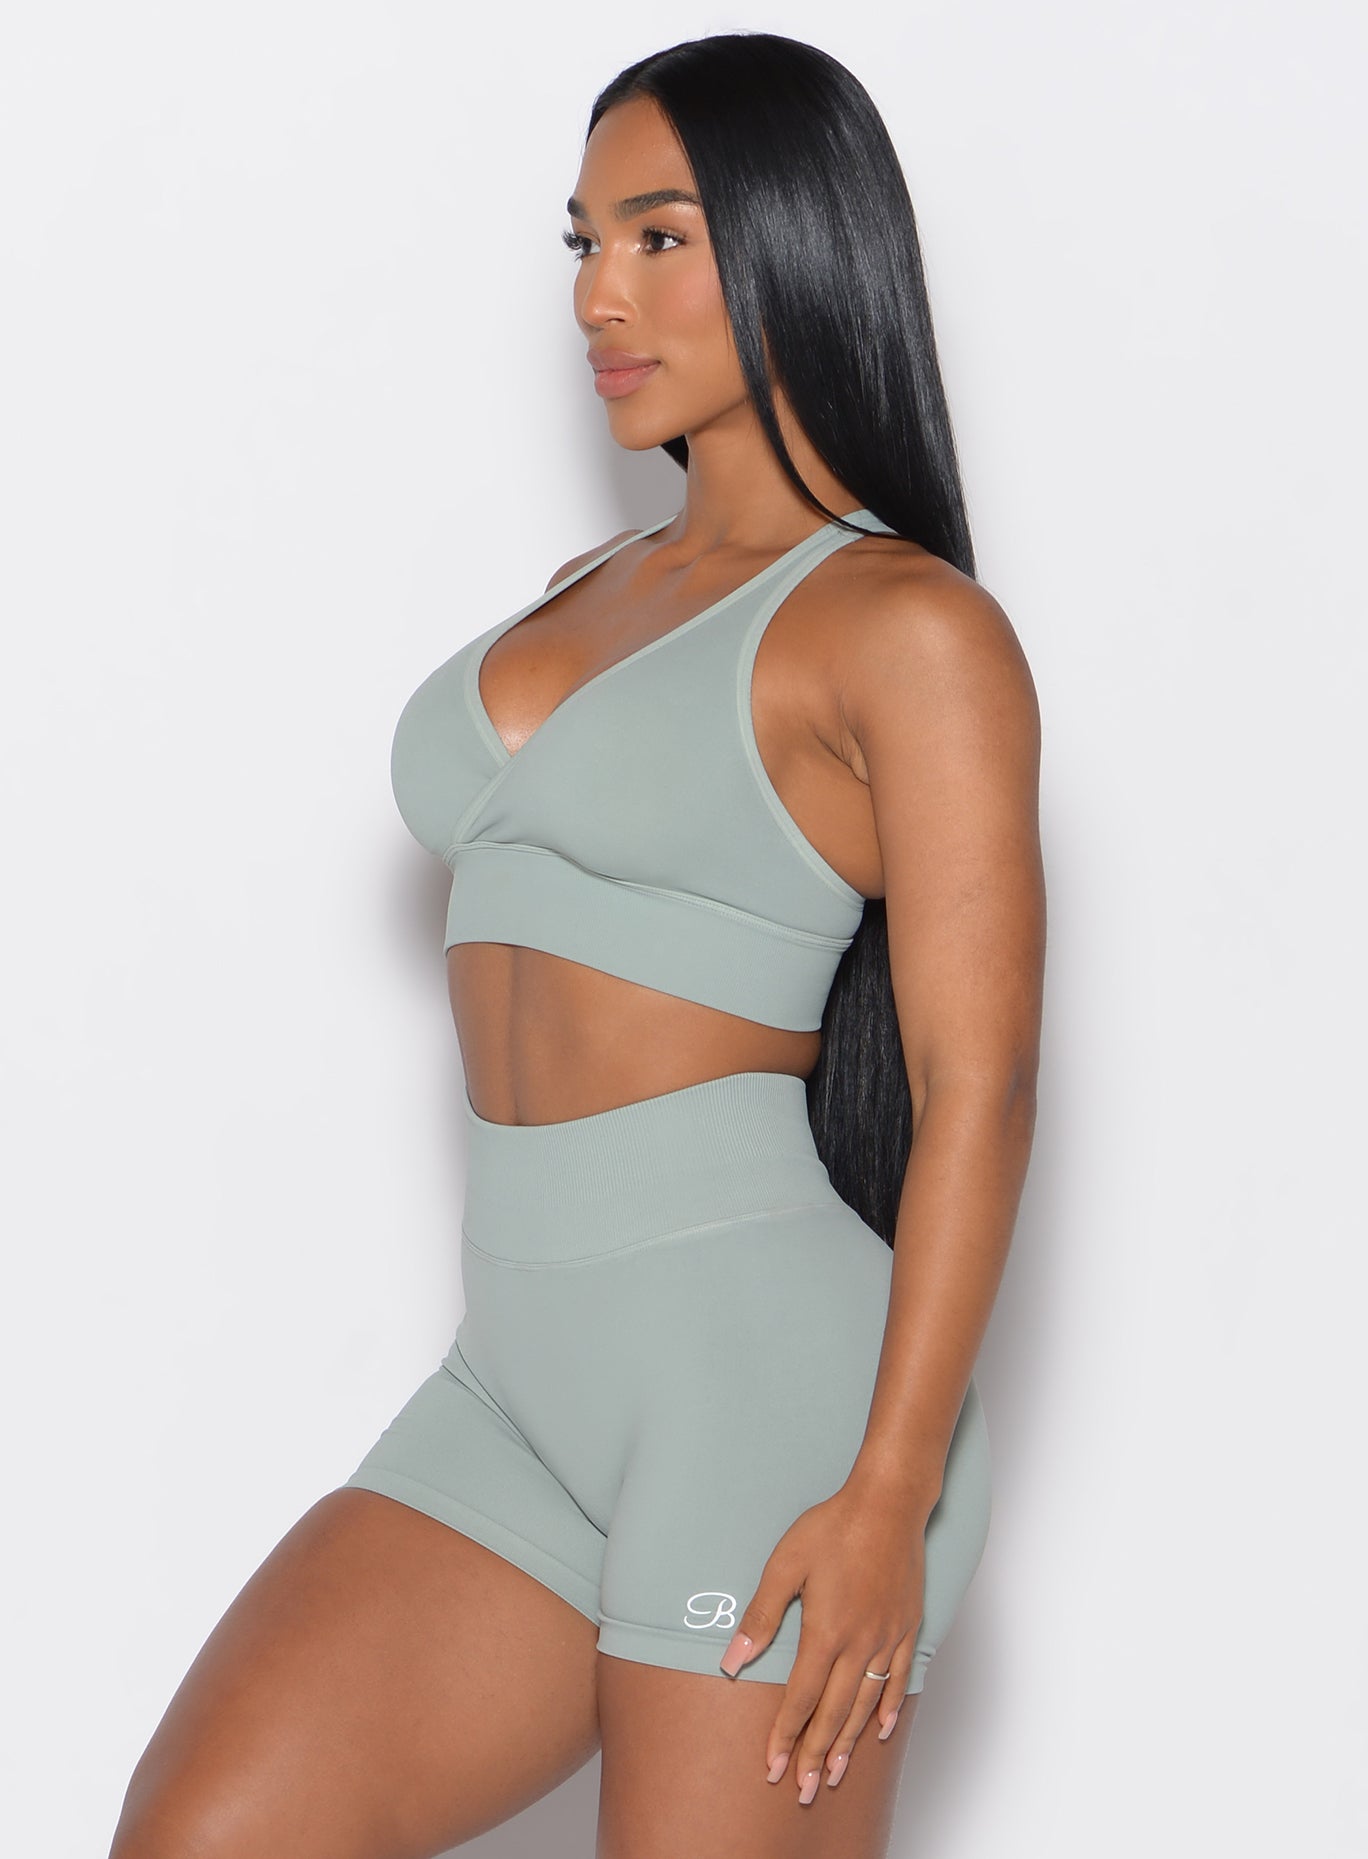 left side profile view of a model facing forward  wearing our cross over bra in light taupe color along with the matching shorts